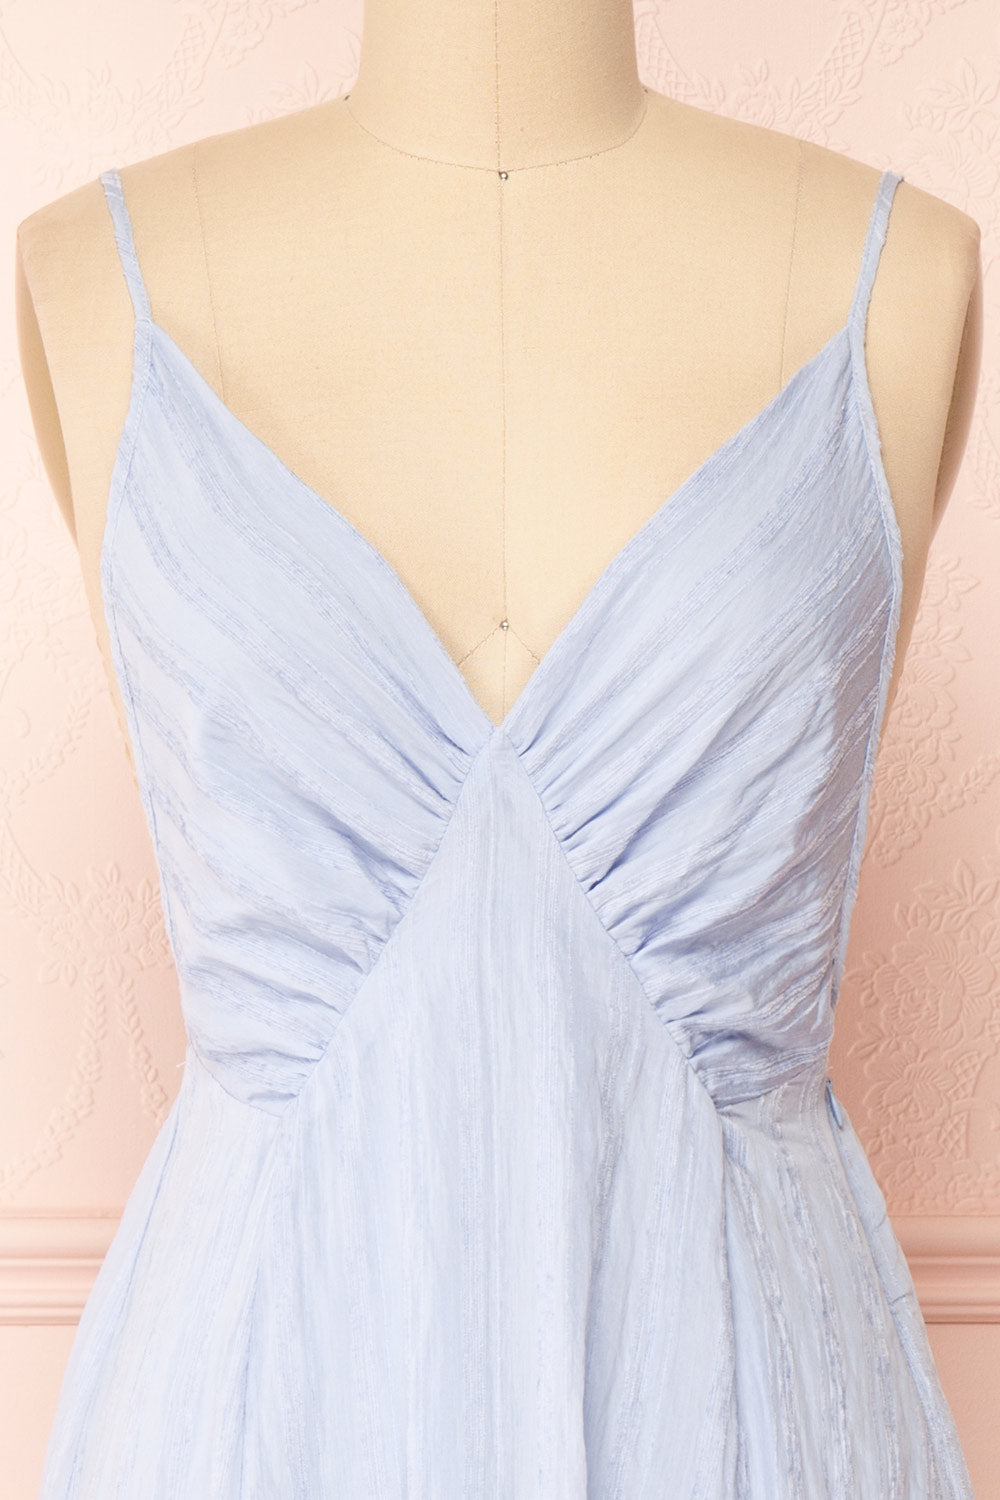 Darby Blue Plunged Neckline Textured Midi Dress | Boutique 1861 front close-up